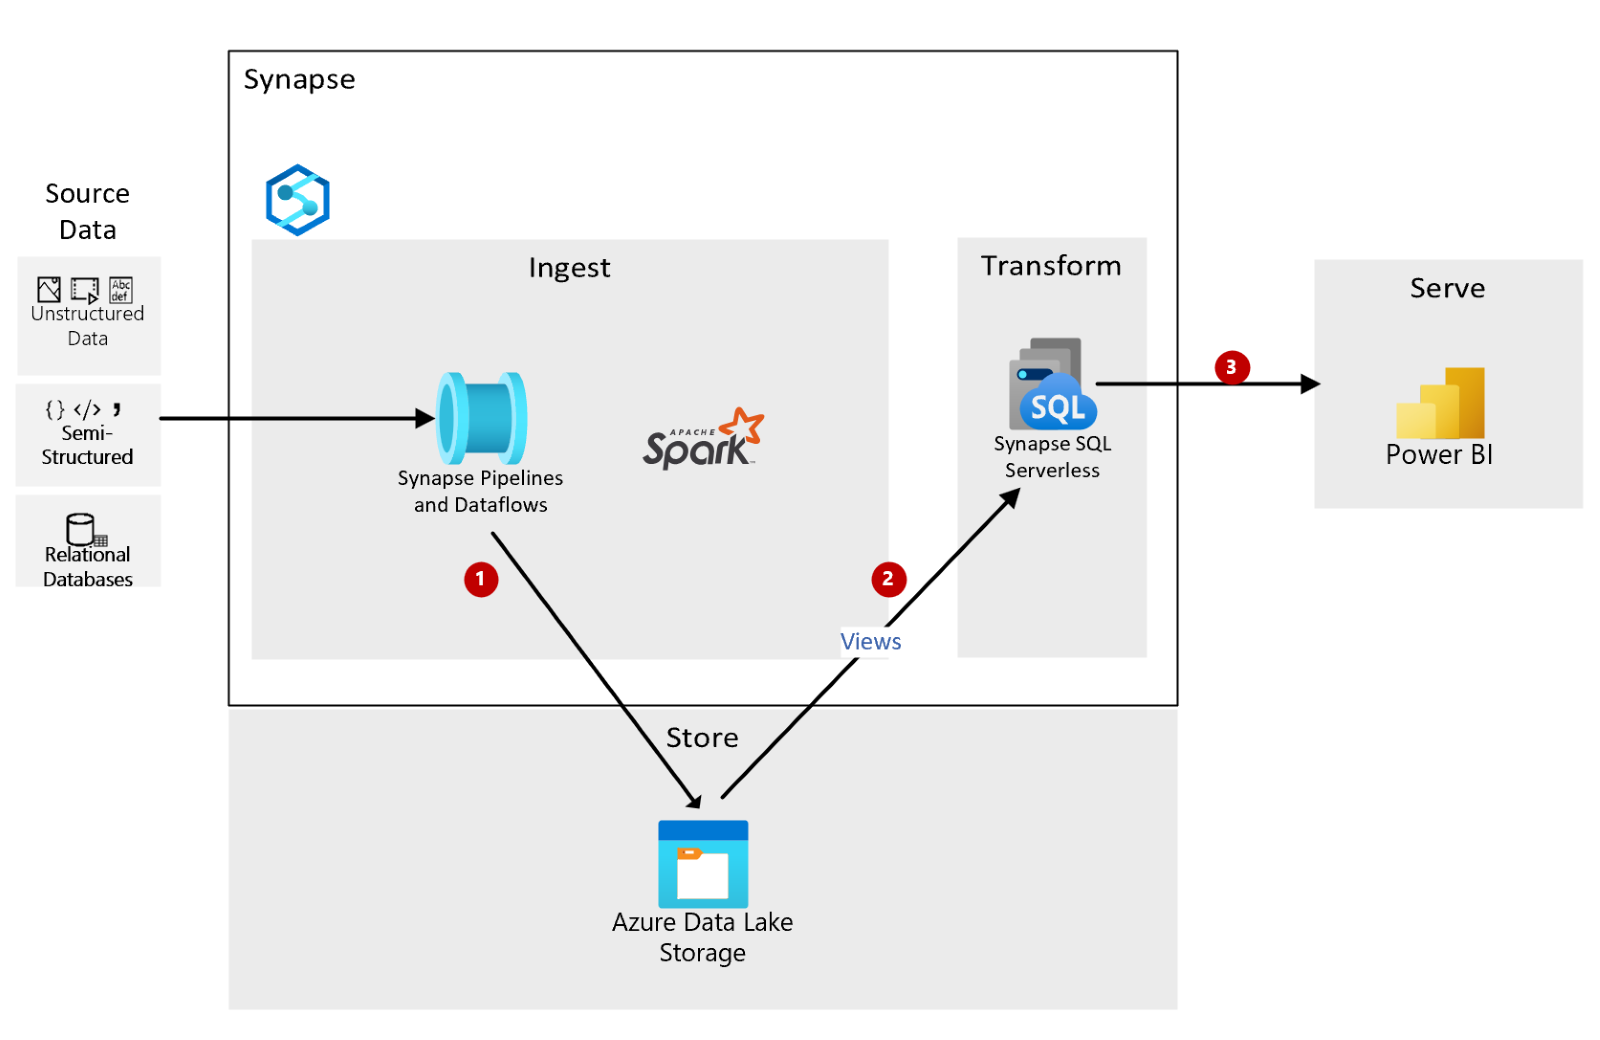 Build a logical Enterprise Data Warehouse with ADLS and Synapse Serverless  SQL pool - Microsoft Community Hub